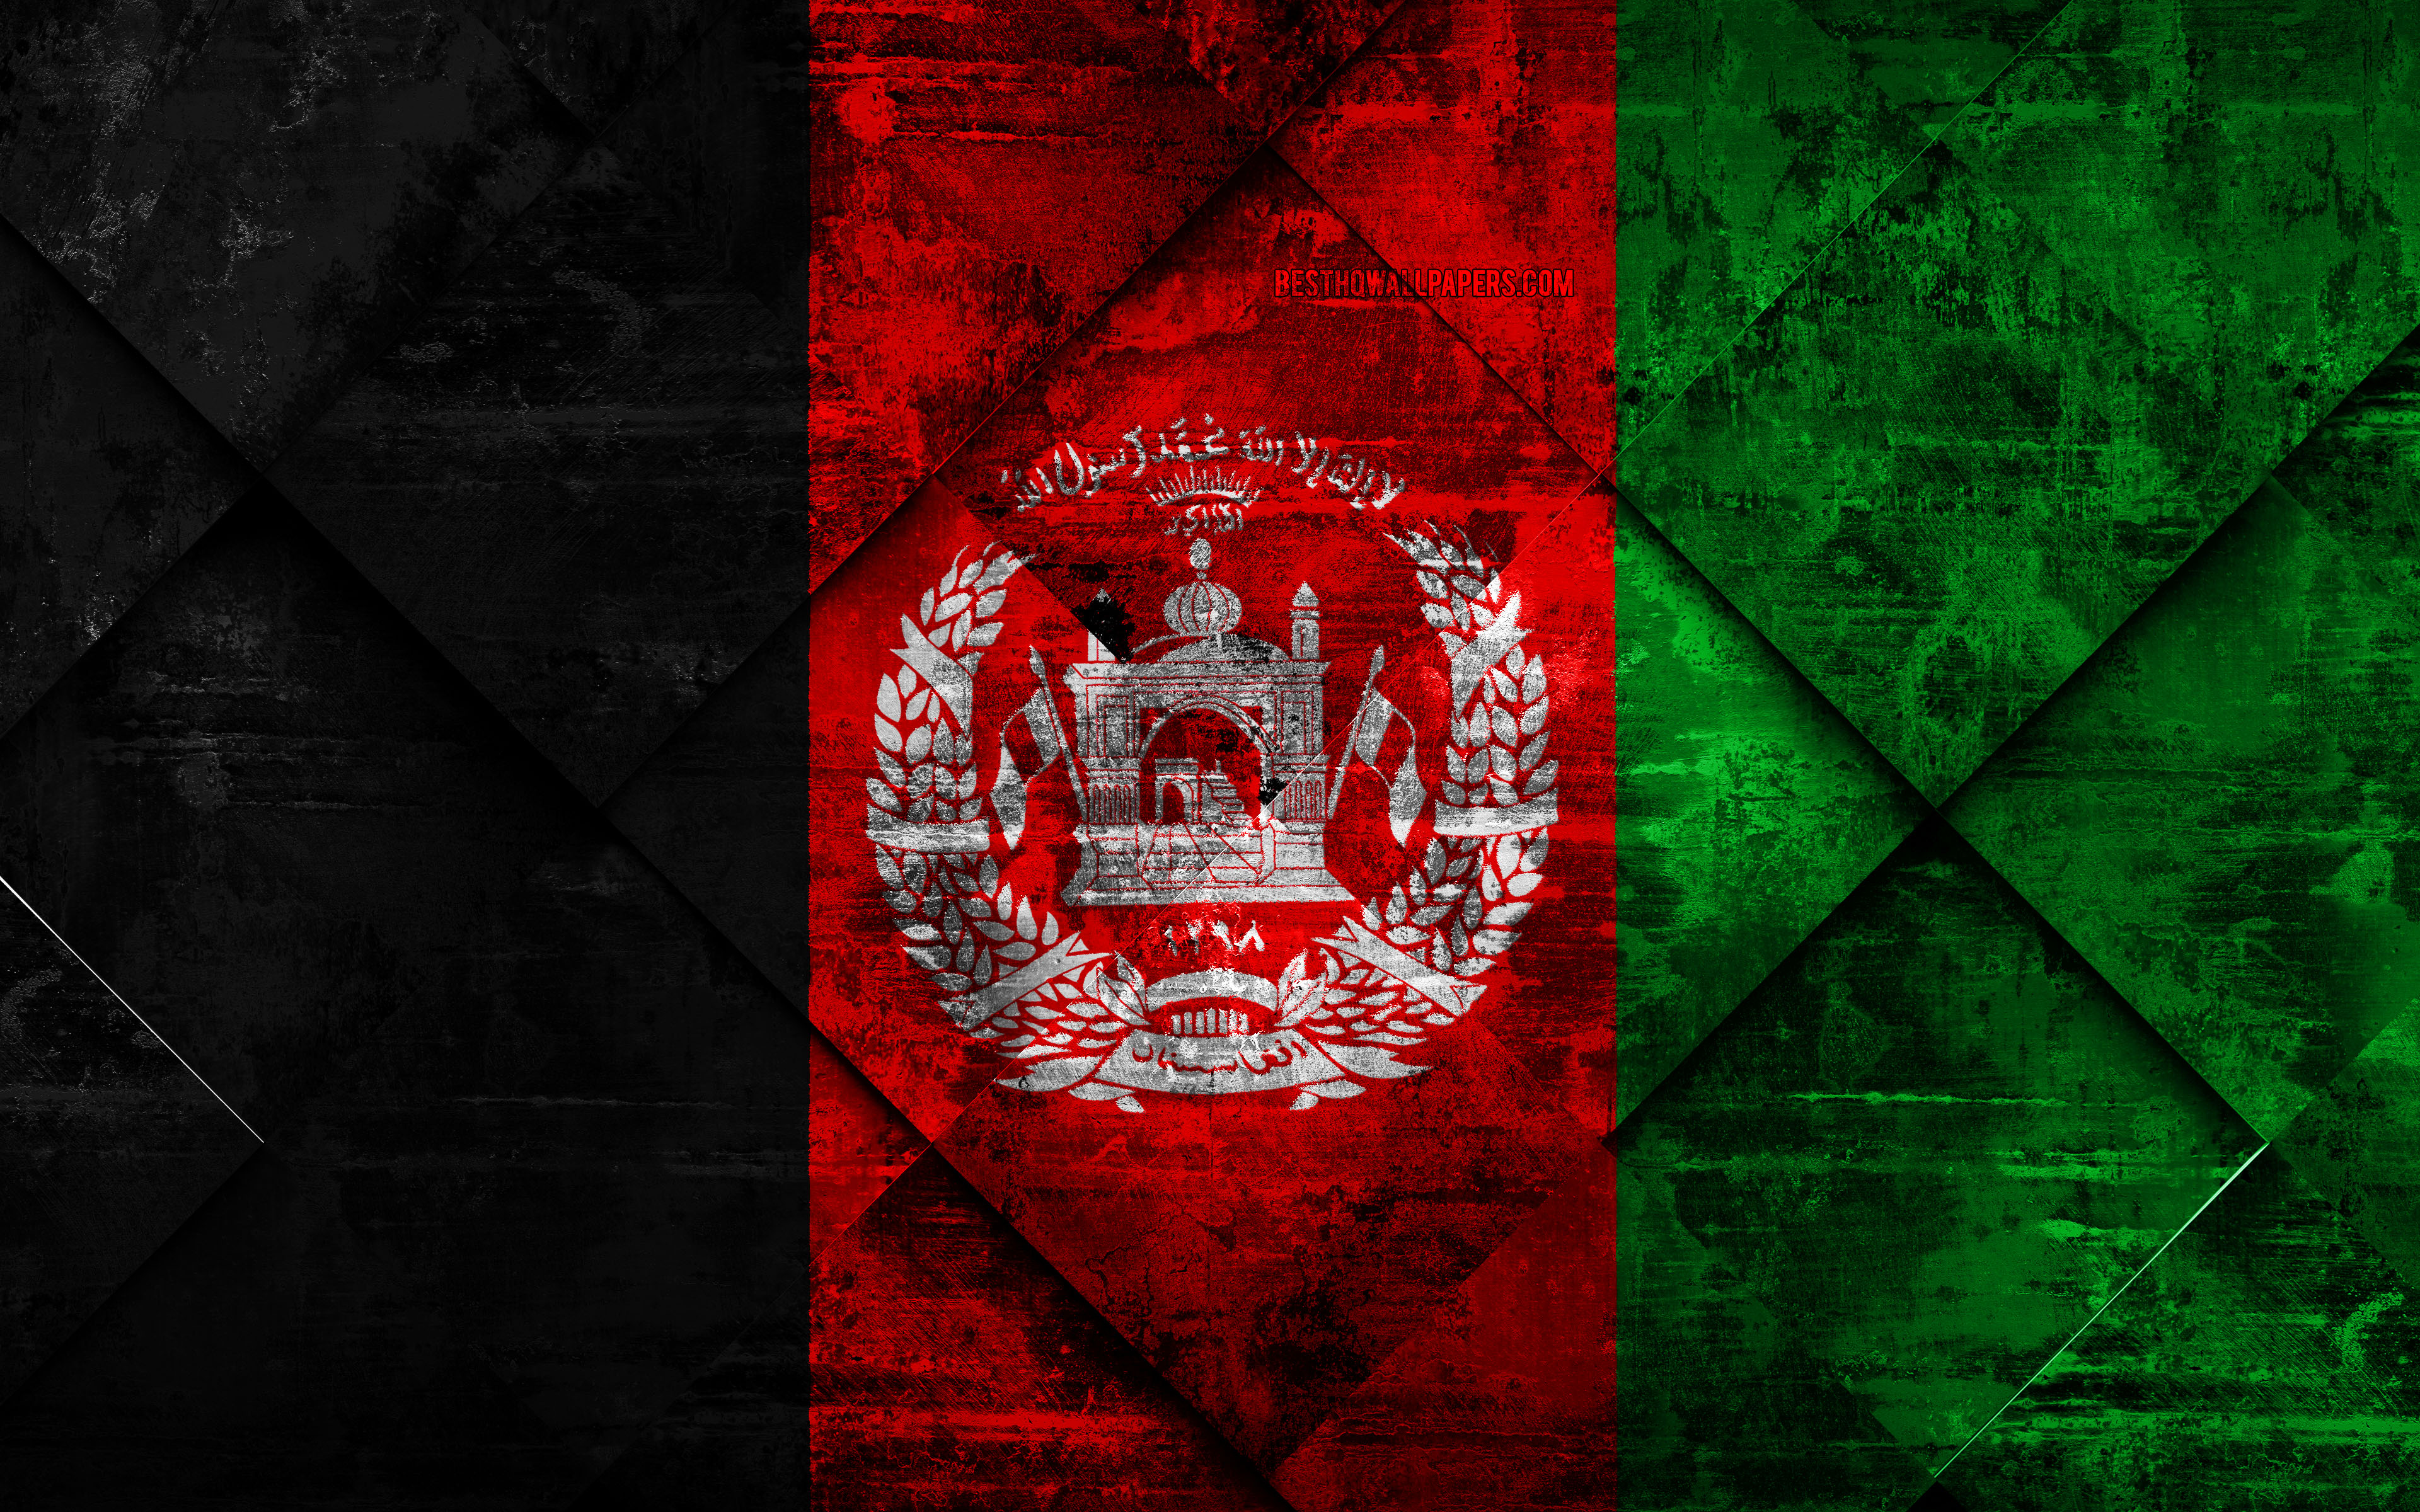 Download wallpaper Flag of Afghanistan, 4k, grunge art, rhombus grunge texture, Afghanistan flag, Asia, national symbols, Afghanistan, creative art for desktop with resolution 3840x2400. High Quality HD picture wallpaper